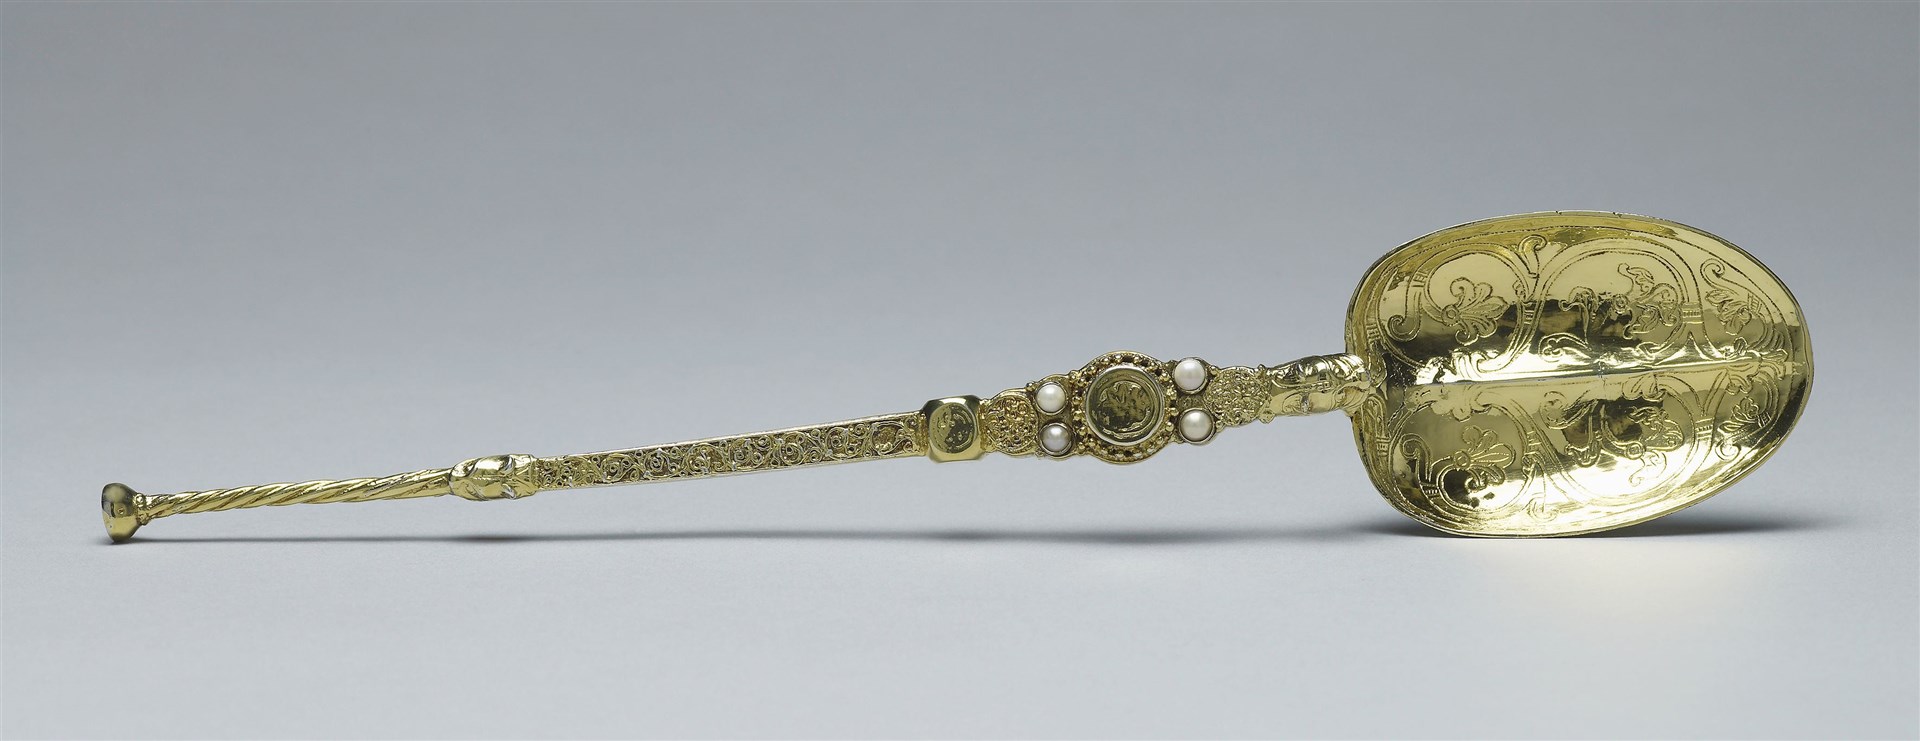 The Coronation Spoon (Royal Collection Trust/HM King Charles III/PA)